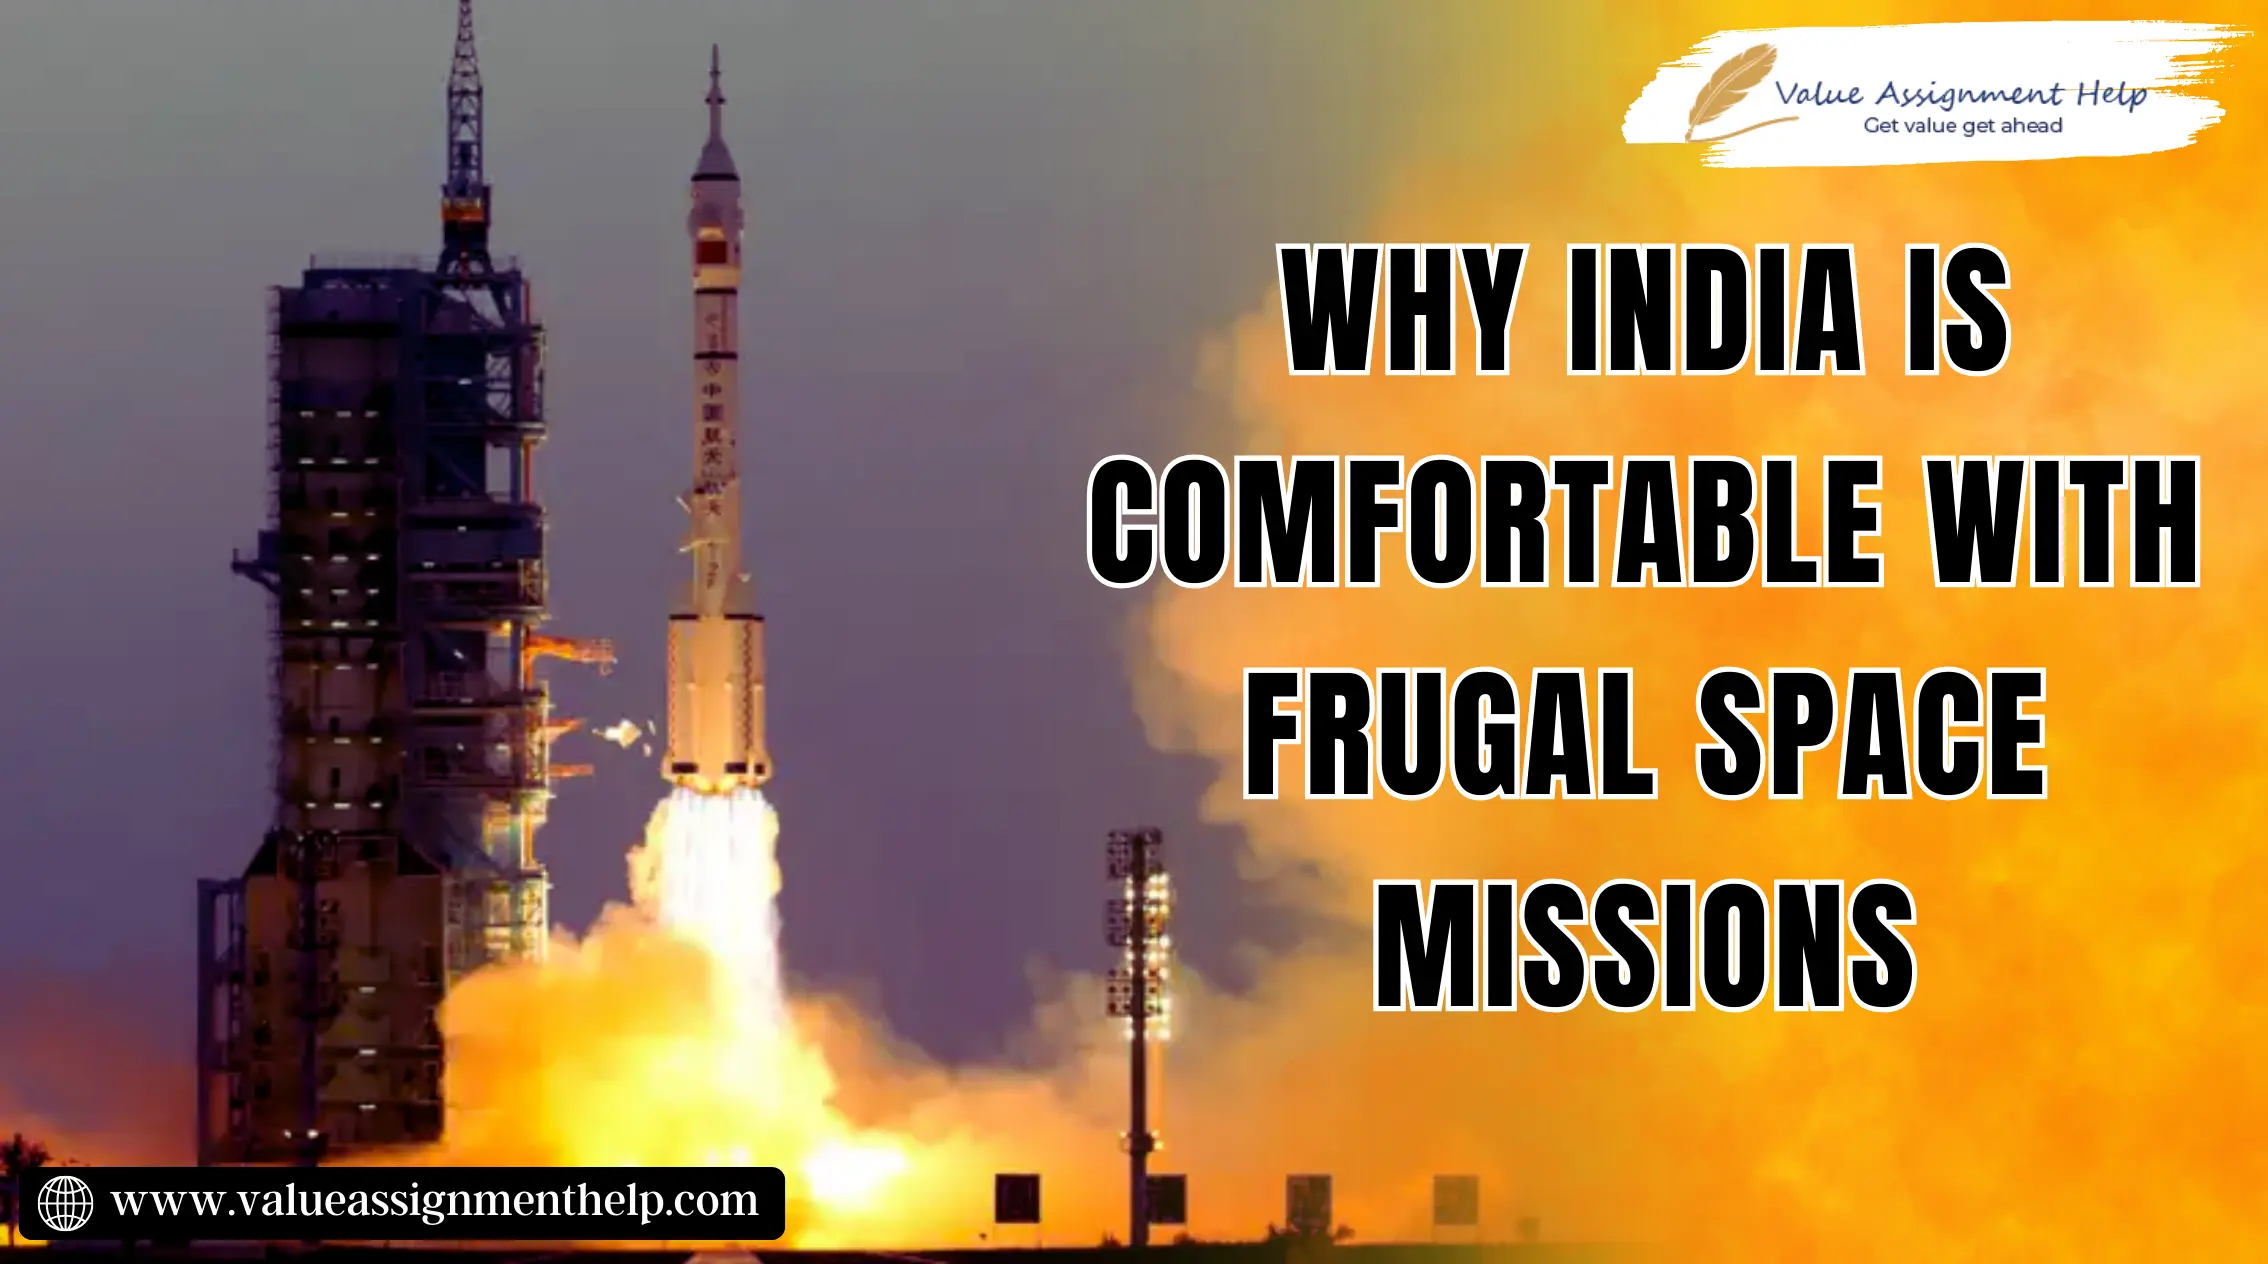  Why India is comfortable with frugal space missions